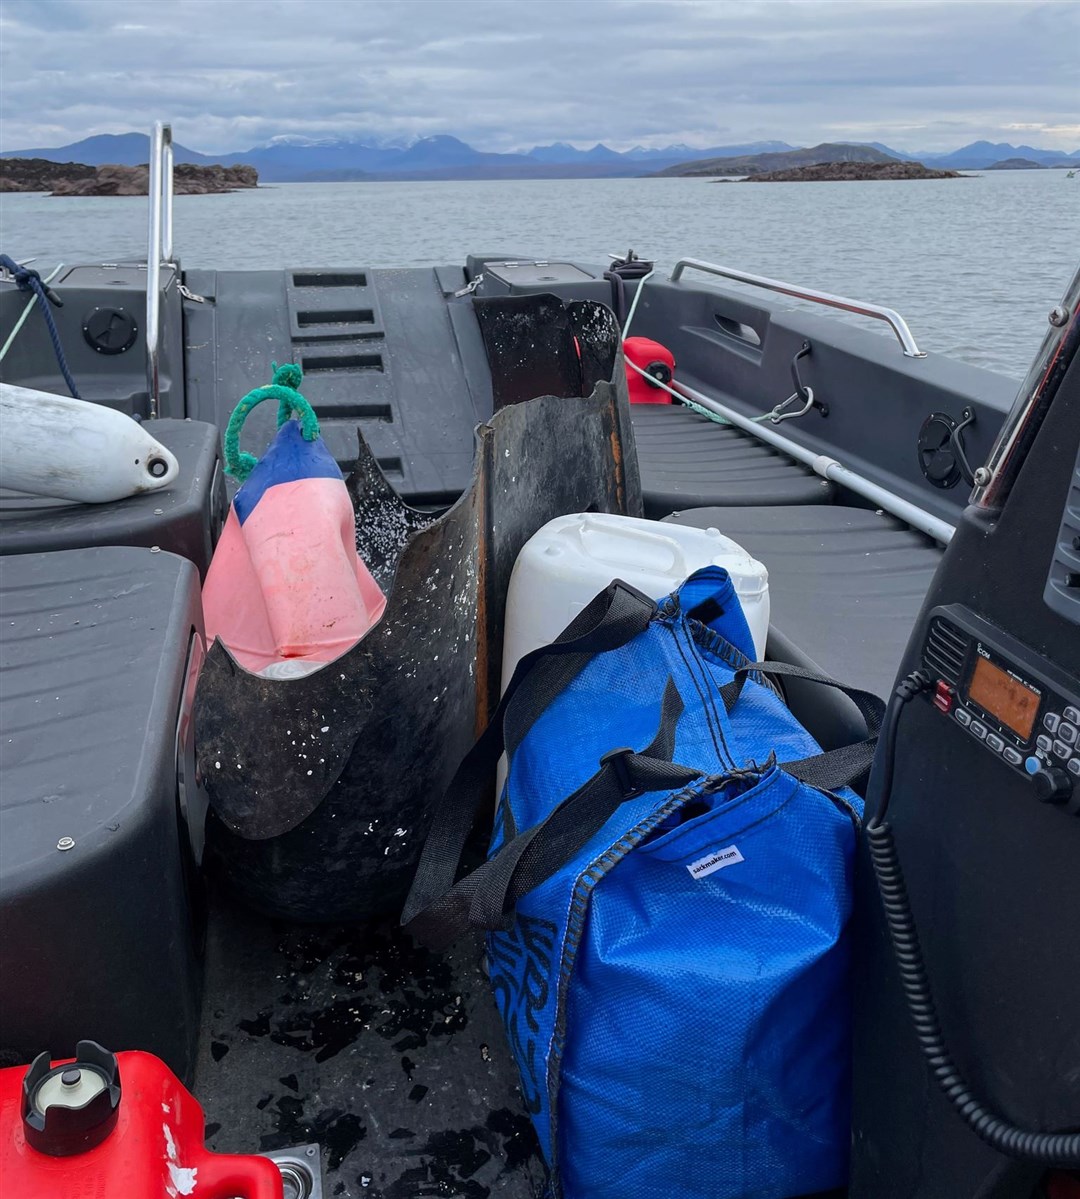 The 17kg of marine litter uplifted from the Eilean Fada Mor.